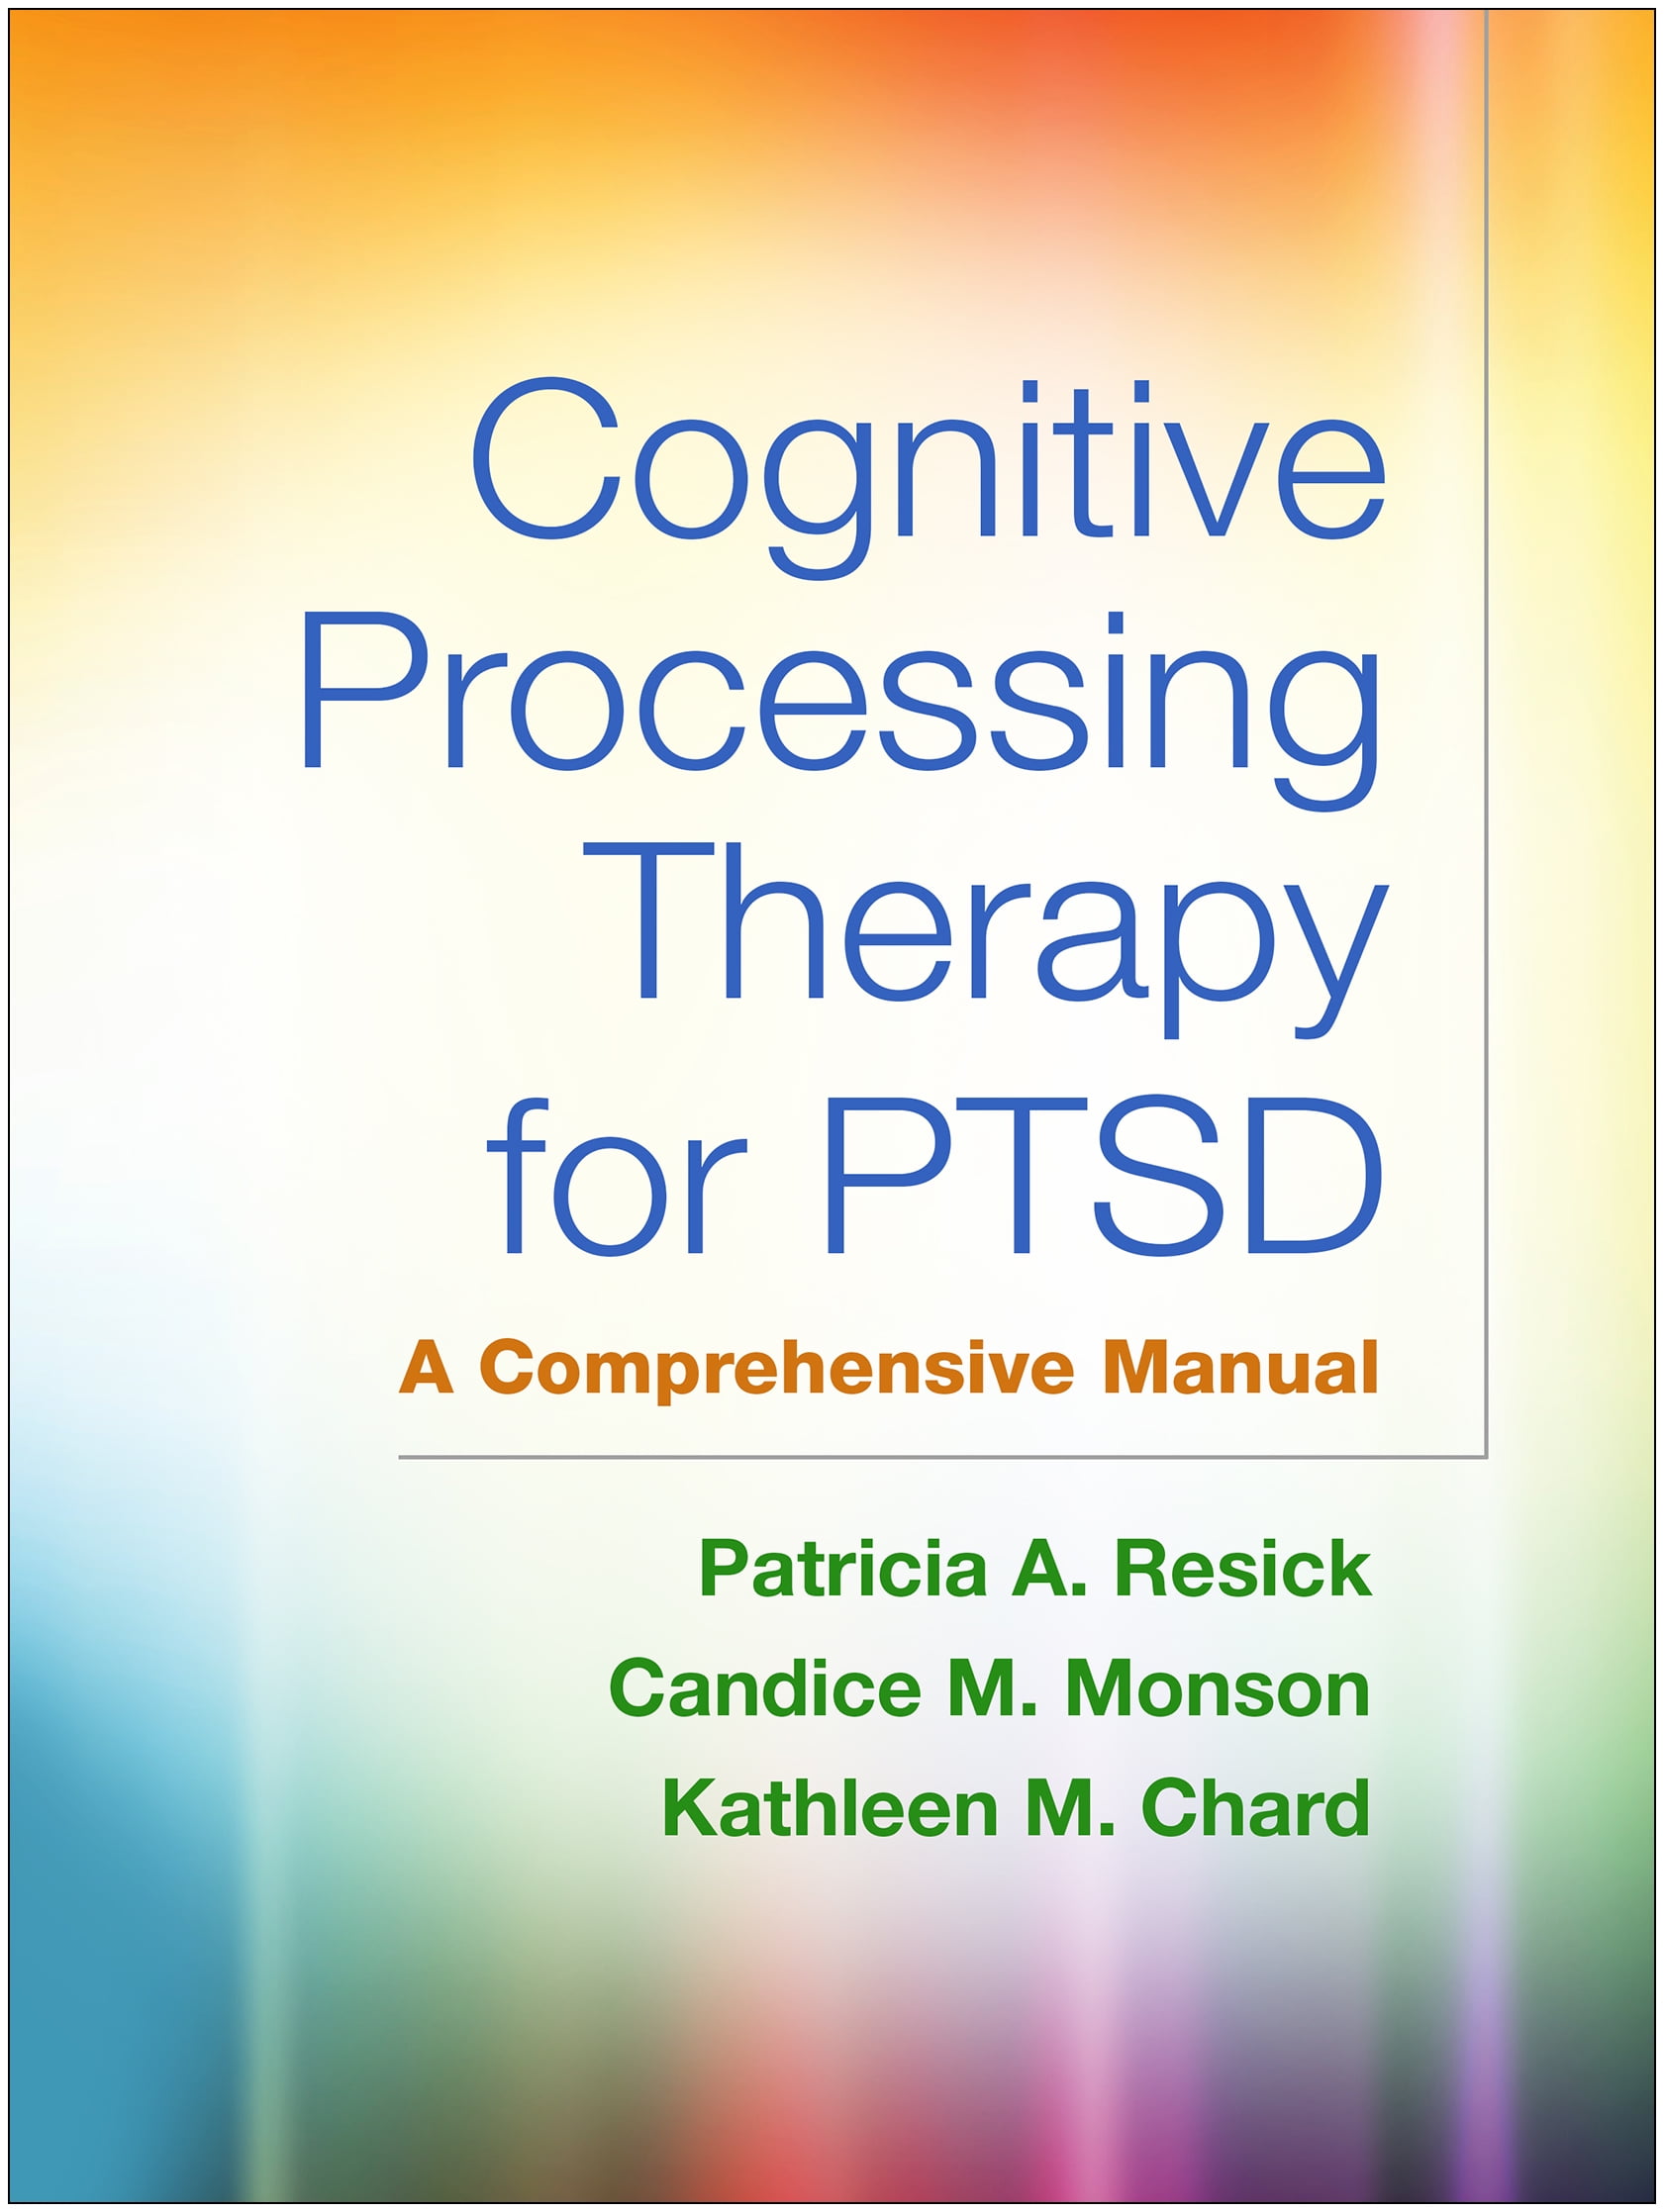 cognitive processing therapy for ptsd a comprehensive manual pdf